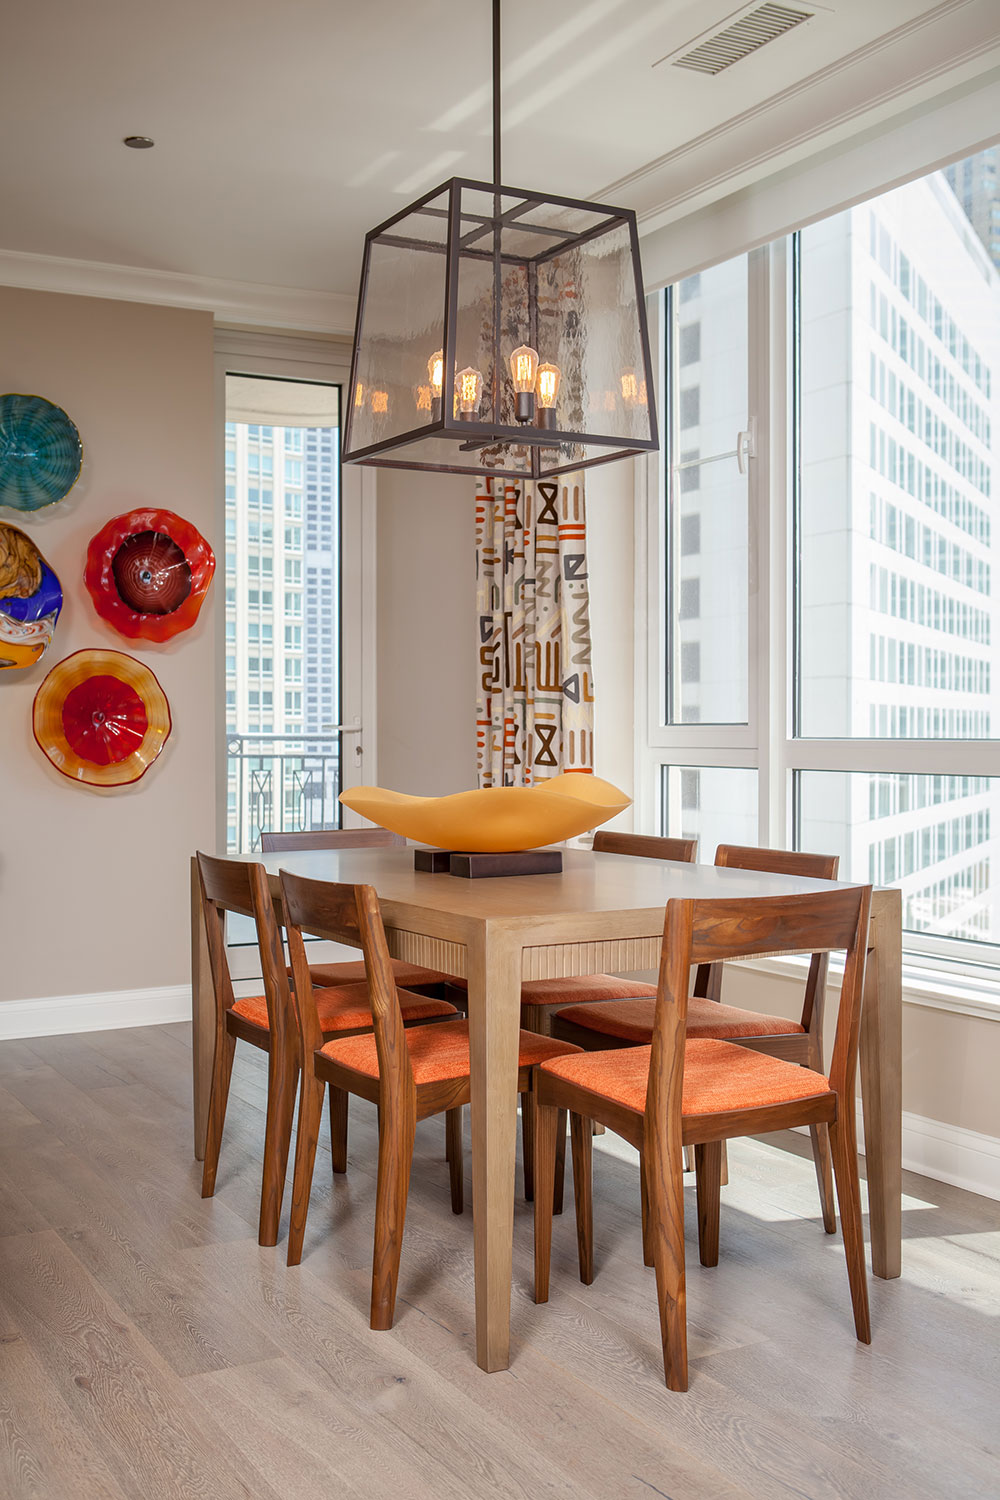 Mid-Century Modern Chairs in Colorful Breakfast Area